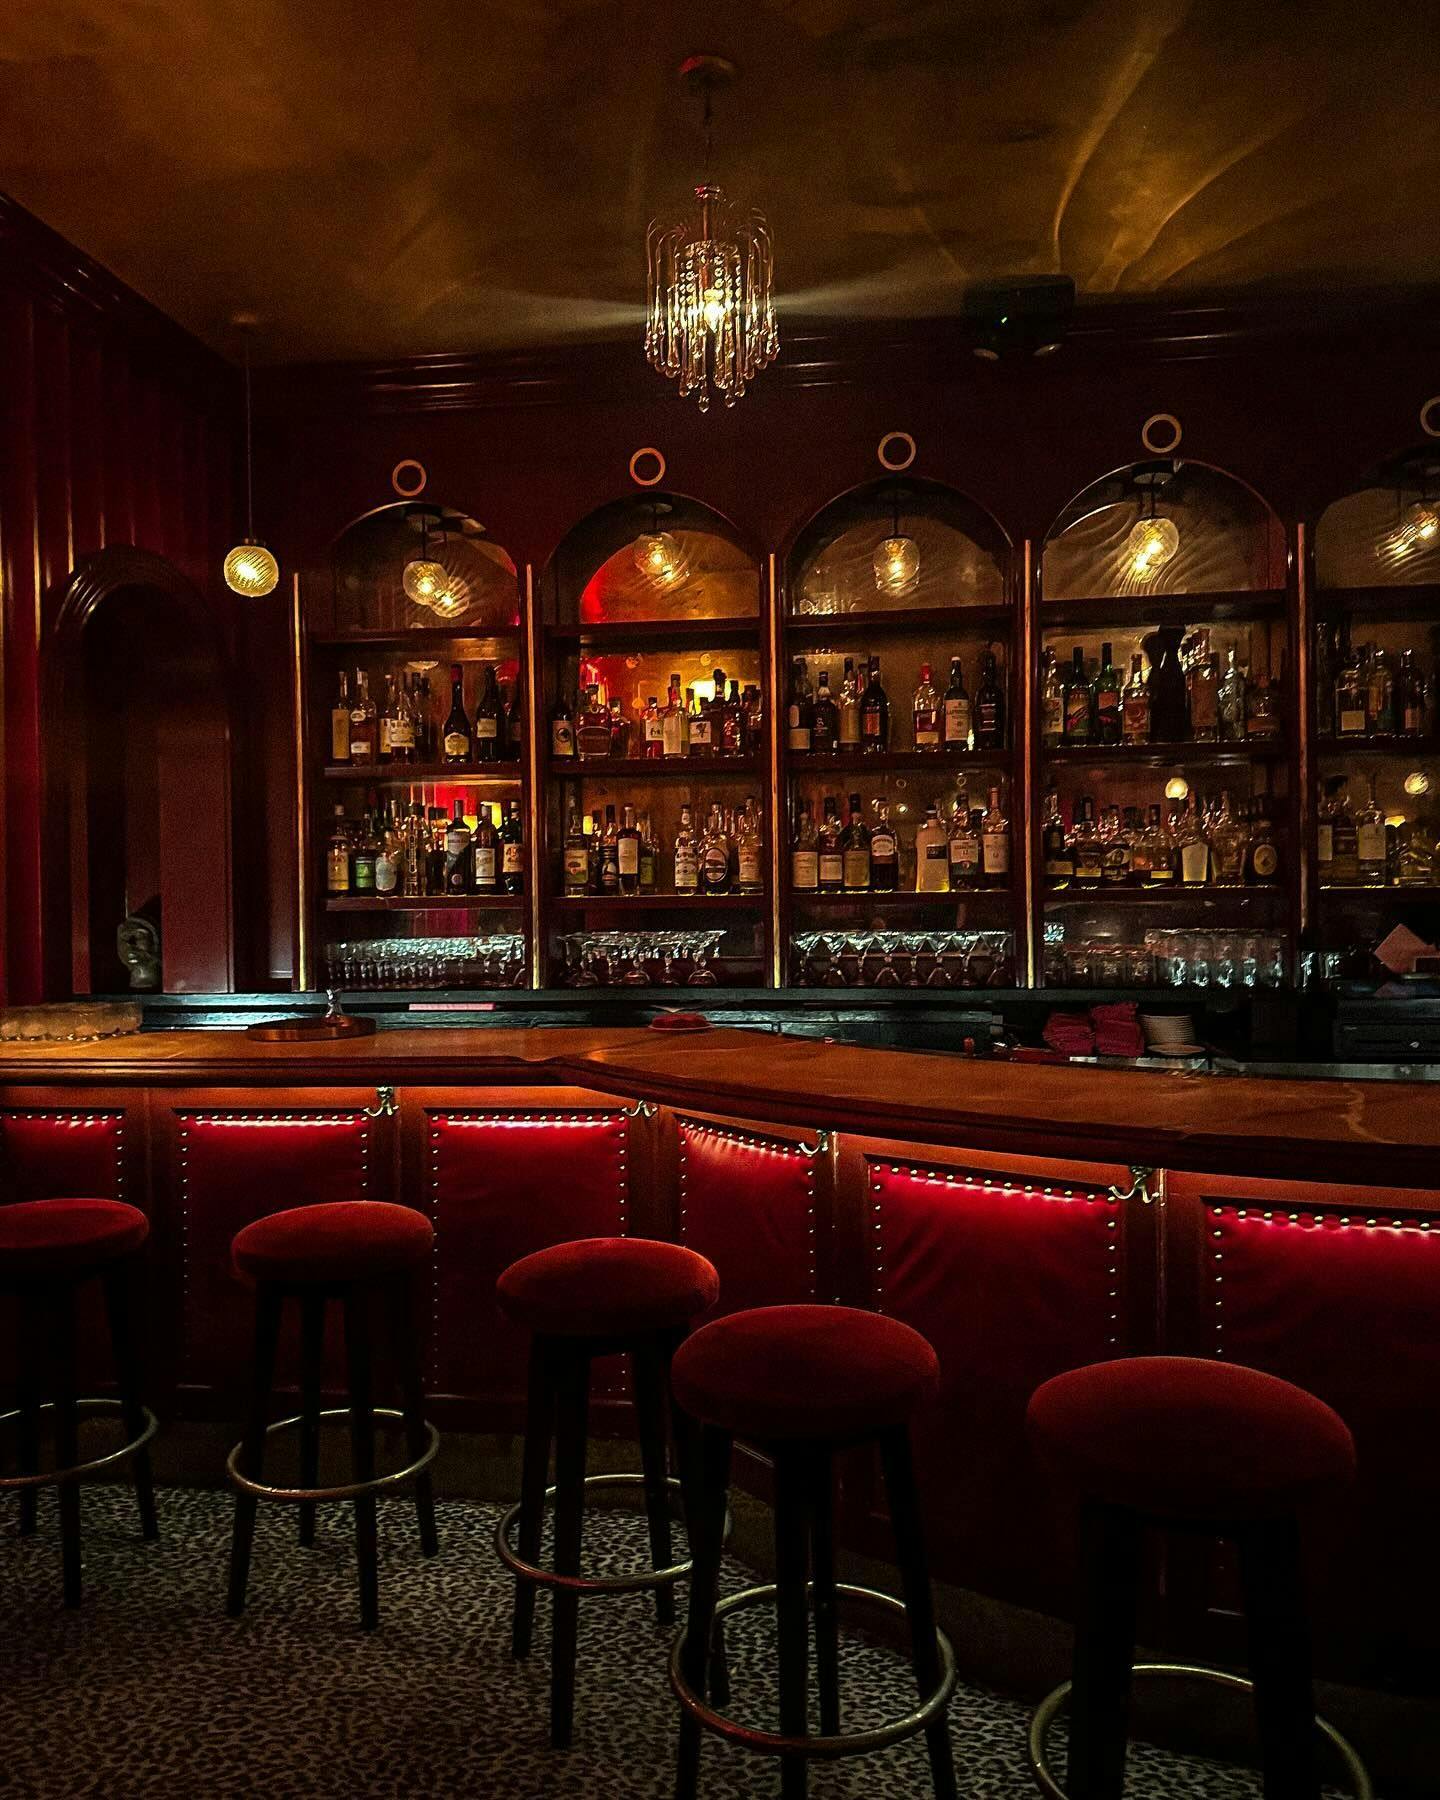 A bar and lounge bathed in a warm, inviting glow, featuring opulent chandeliers and plush red seating that echo the vintage glamour ideal for a sophisticated night out, available to reserve through Booked in New York.